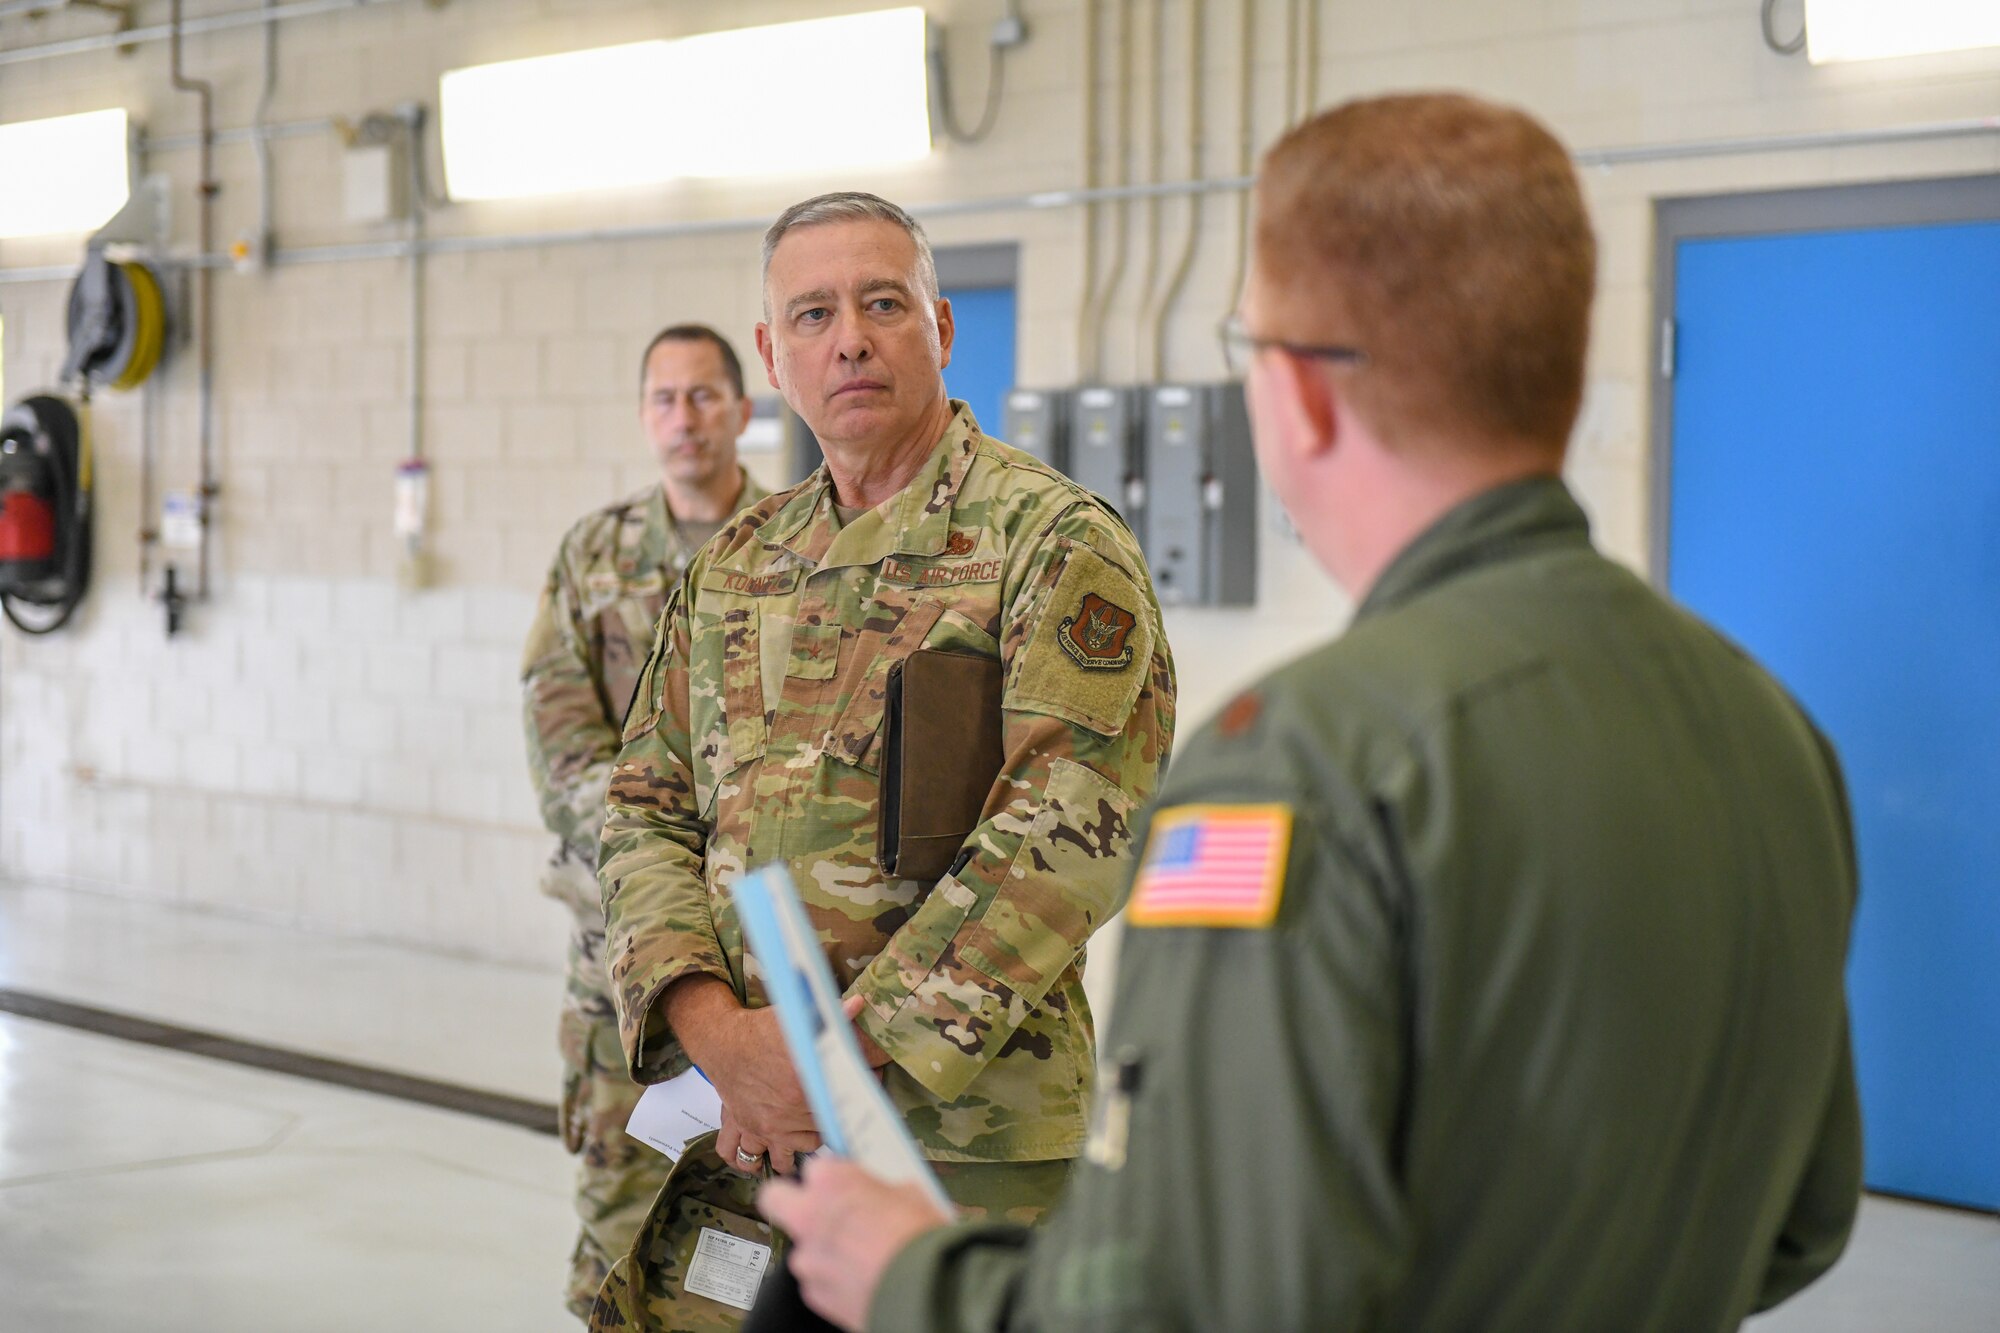 Brig. Gen. William Kountz, the director of logistics, engineering and force protection for Air Force Reserve Command, and Maj. Ryan Cooley, the chief navigator of the 757th Airlift Squadron, discuss the 757th AS’s capabilities.